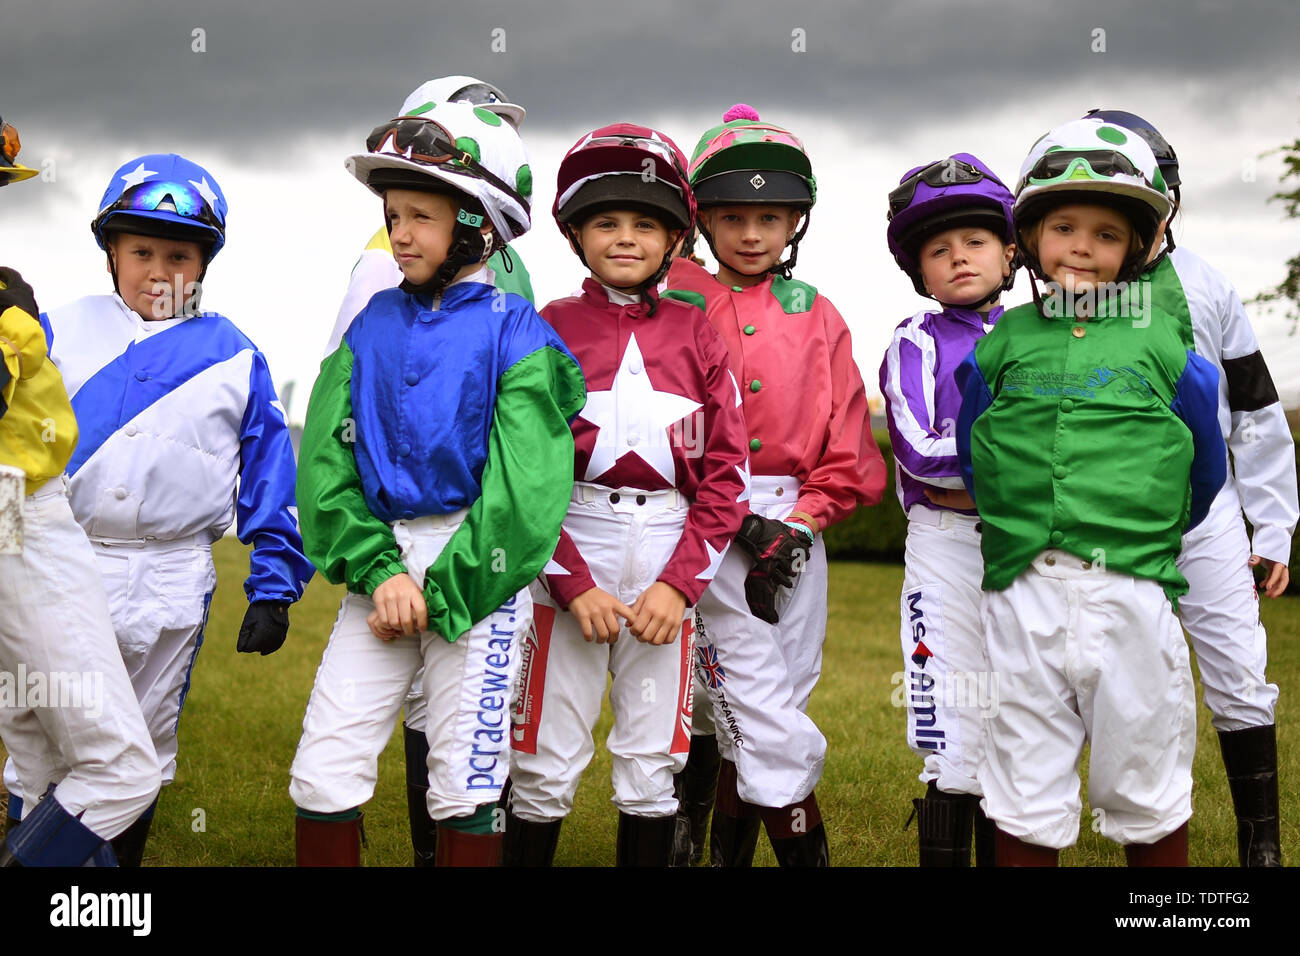 Jockeys await the start of the Shetland Pony Grand National during The Lincolnshire Show 2019 at the Lincolnshire Showground. Stock Photo